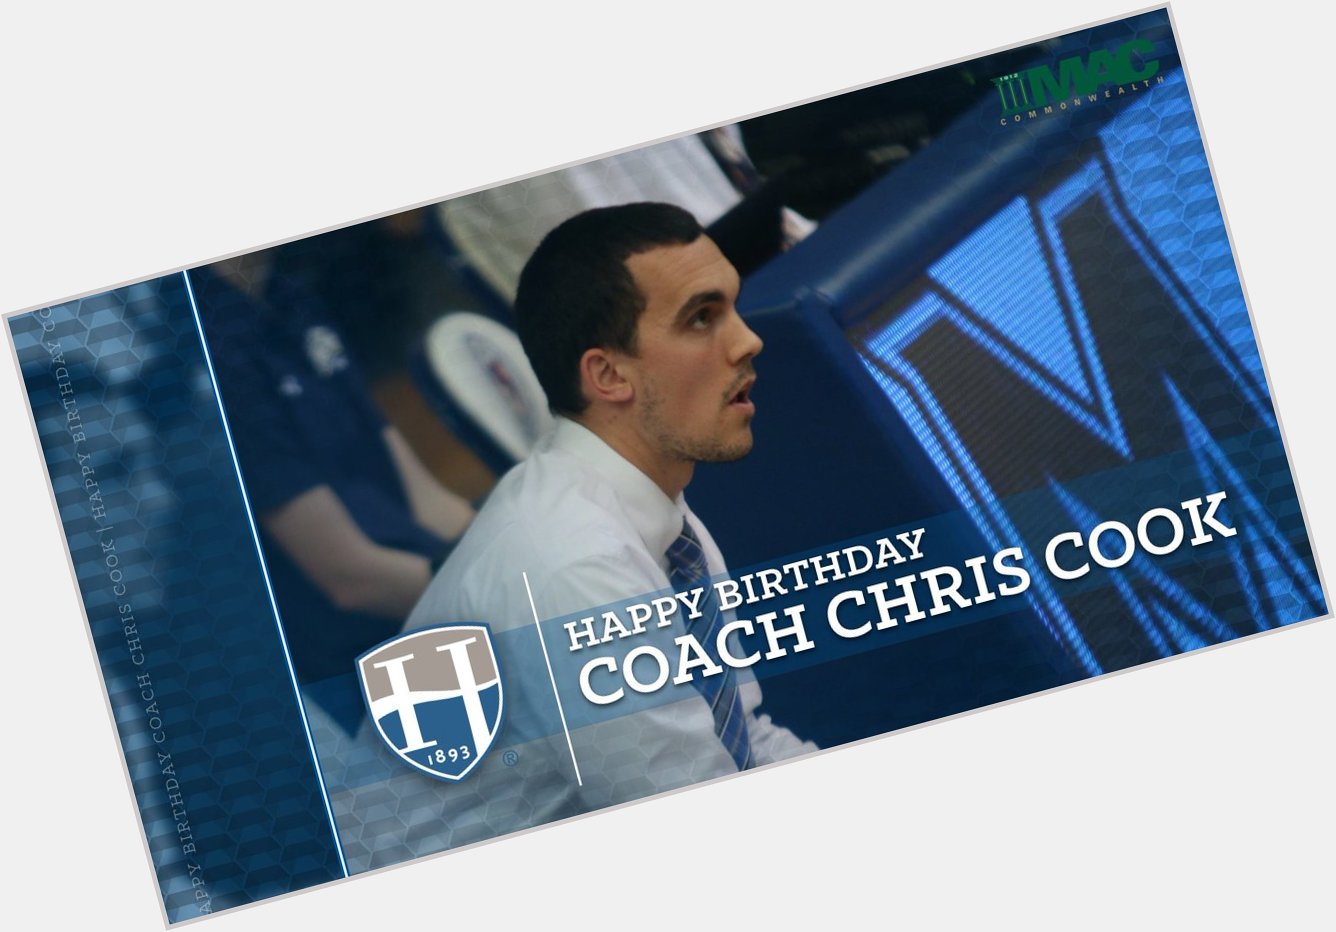 Help us wish a Happy Birthday to Assistant Coach and former MACC Player of the Year, Chris Cook ( ) 